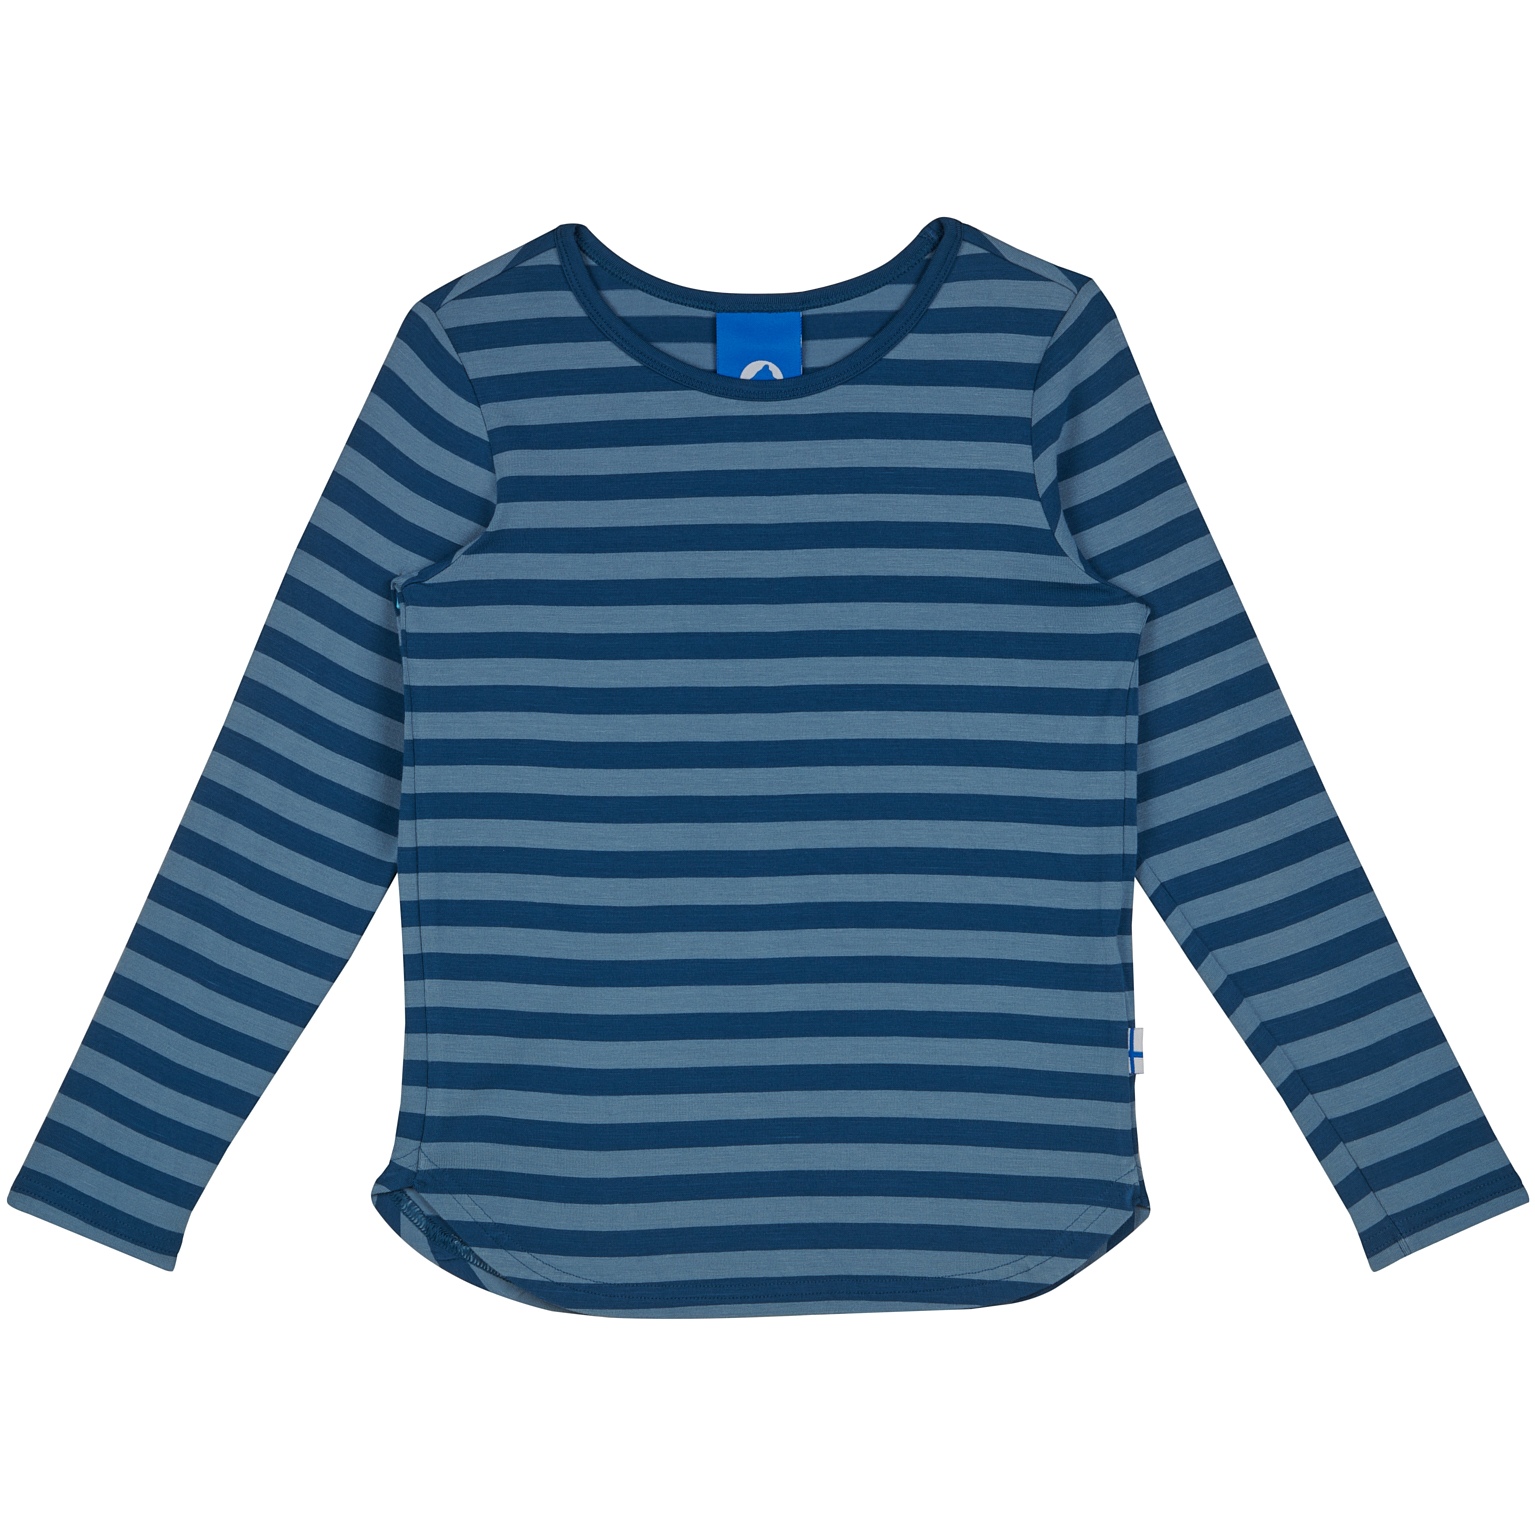 Picture of Finkid MERISILLI Kids Jersey Longsleeve Shirt - dove/real teal